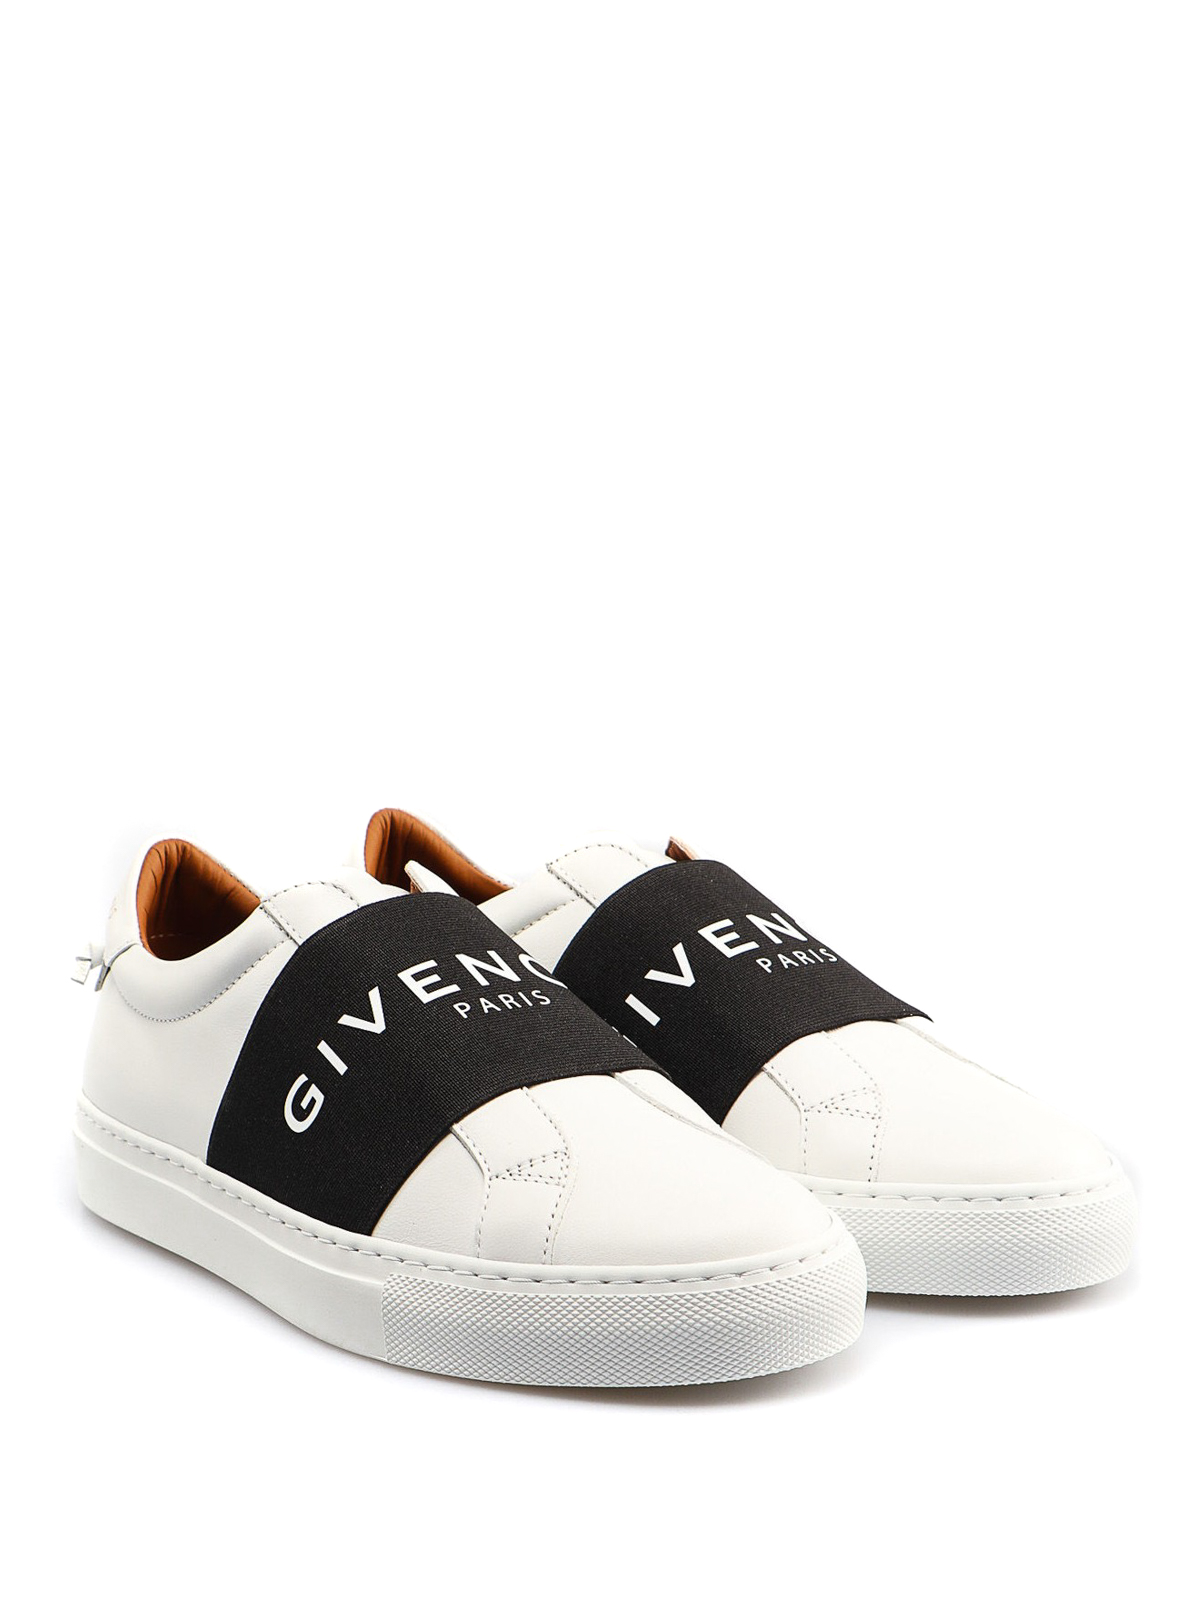 givenchy logo band sneakers